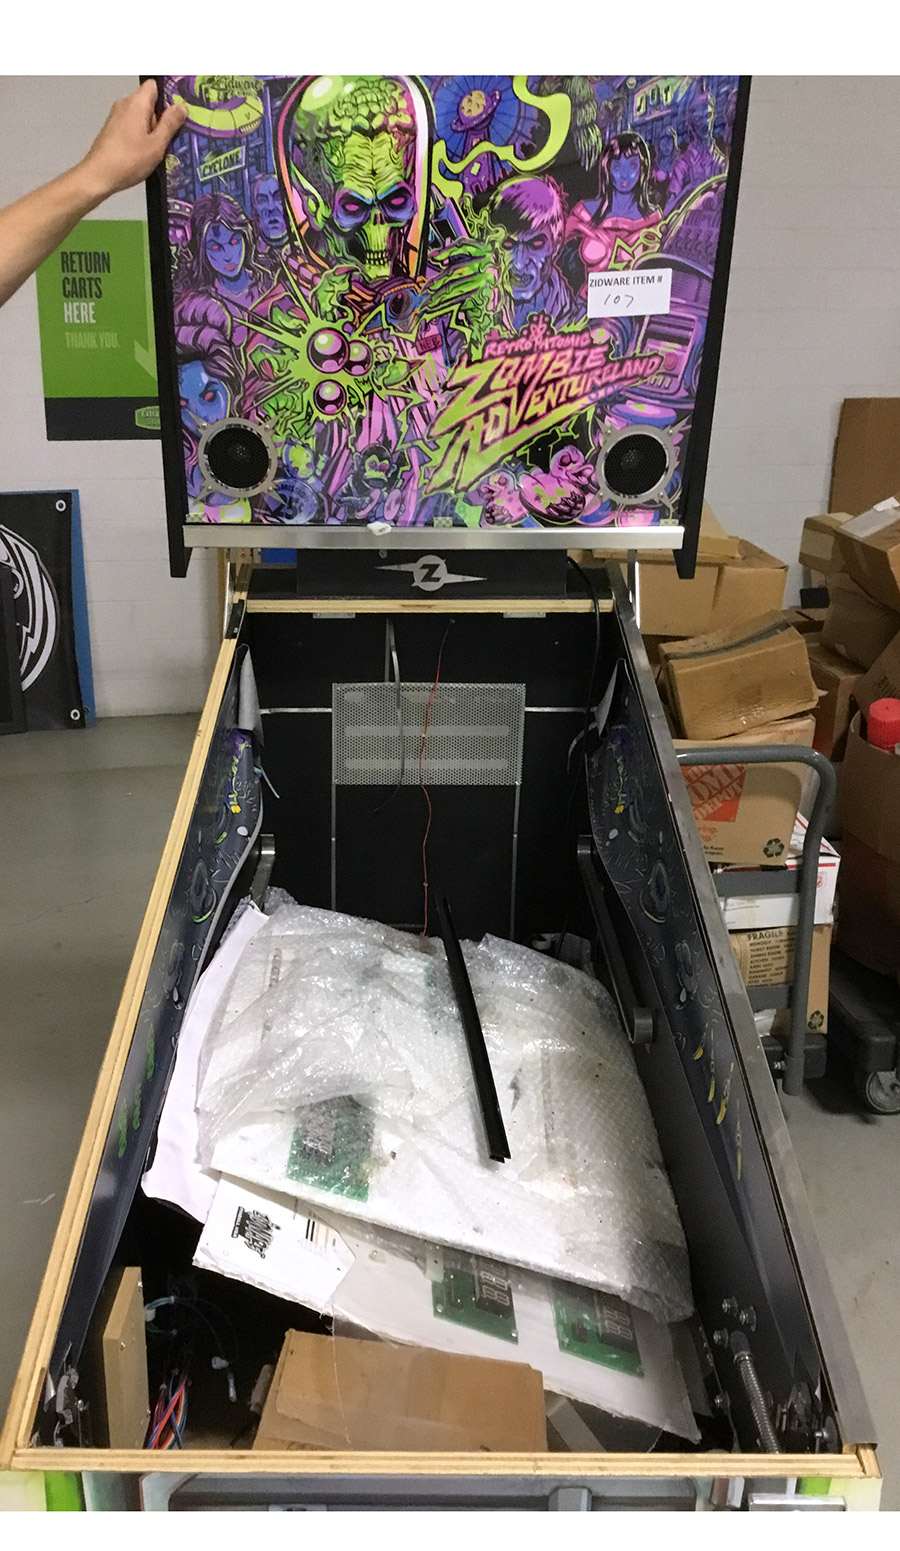 Buy Venom Pinball For Sale Online Or In Store From Game Exchange